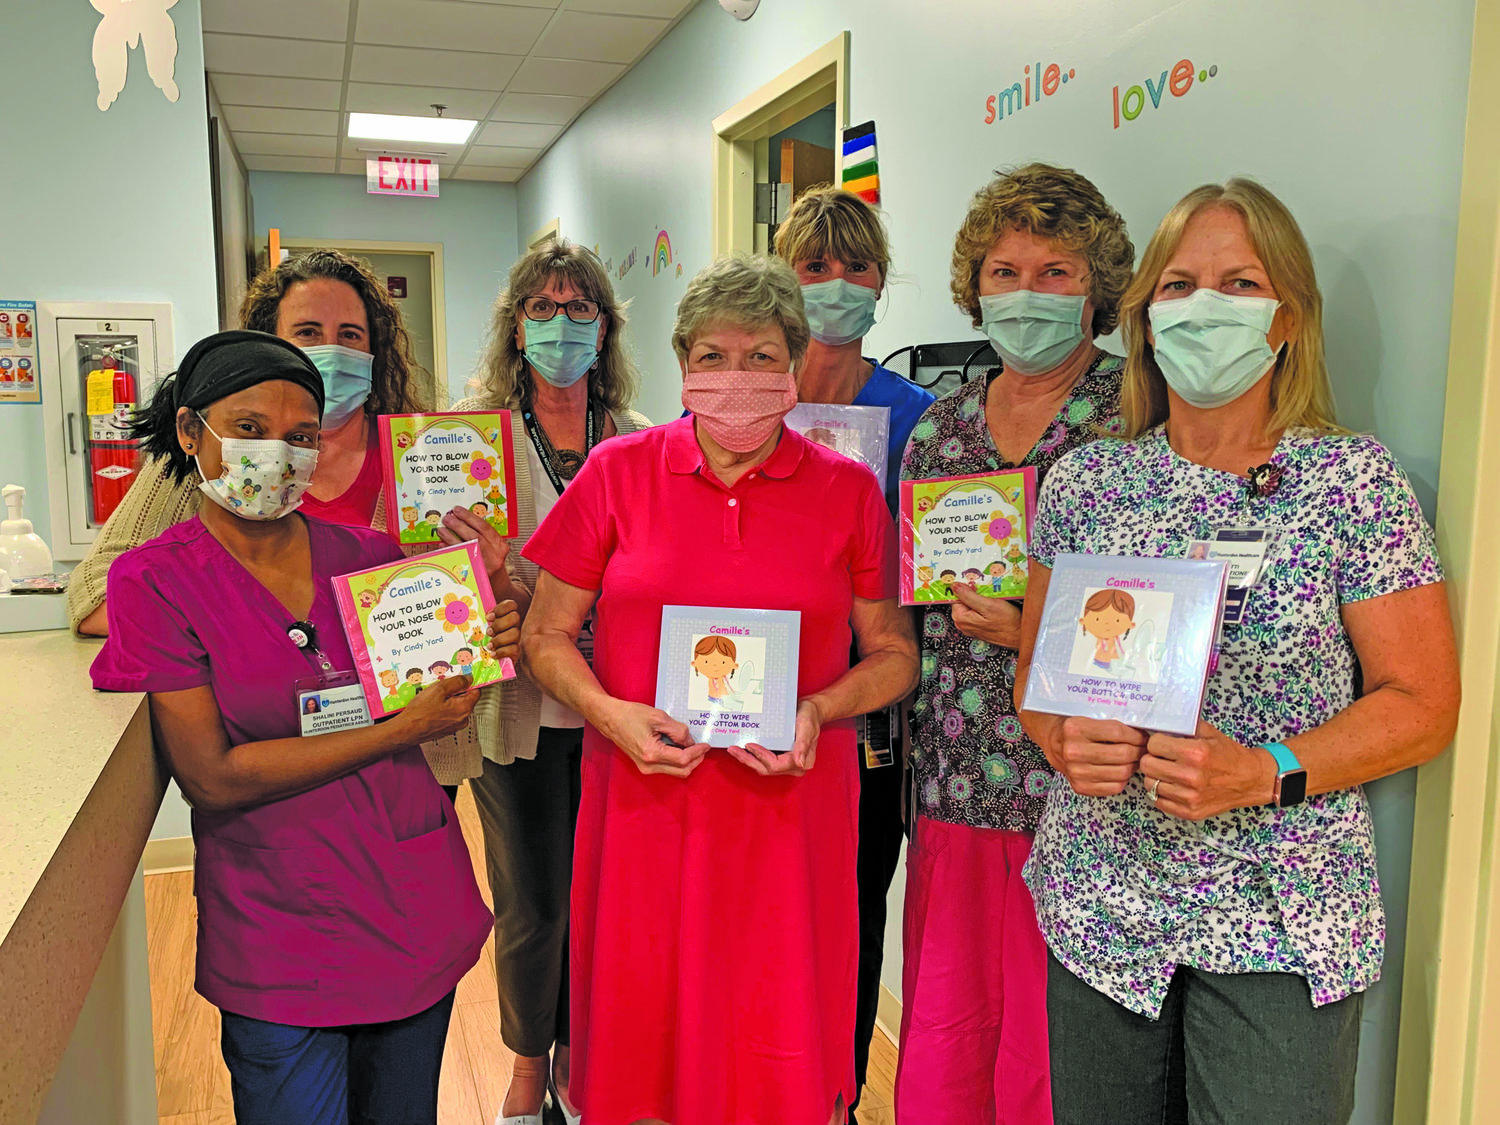 Author Cindy Yard, center, delivers her books to the staff at the Hunterdon Pediatric Associates Sand Hill office located in Flemington, N.J. The books will be available in all five Hunterdon Pediatric Associates offices.